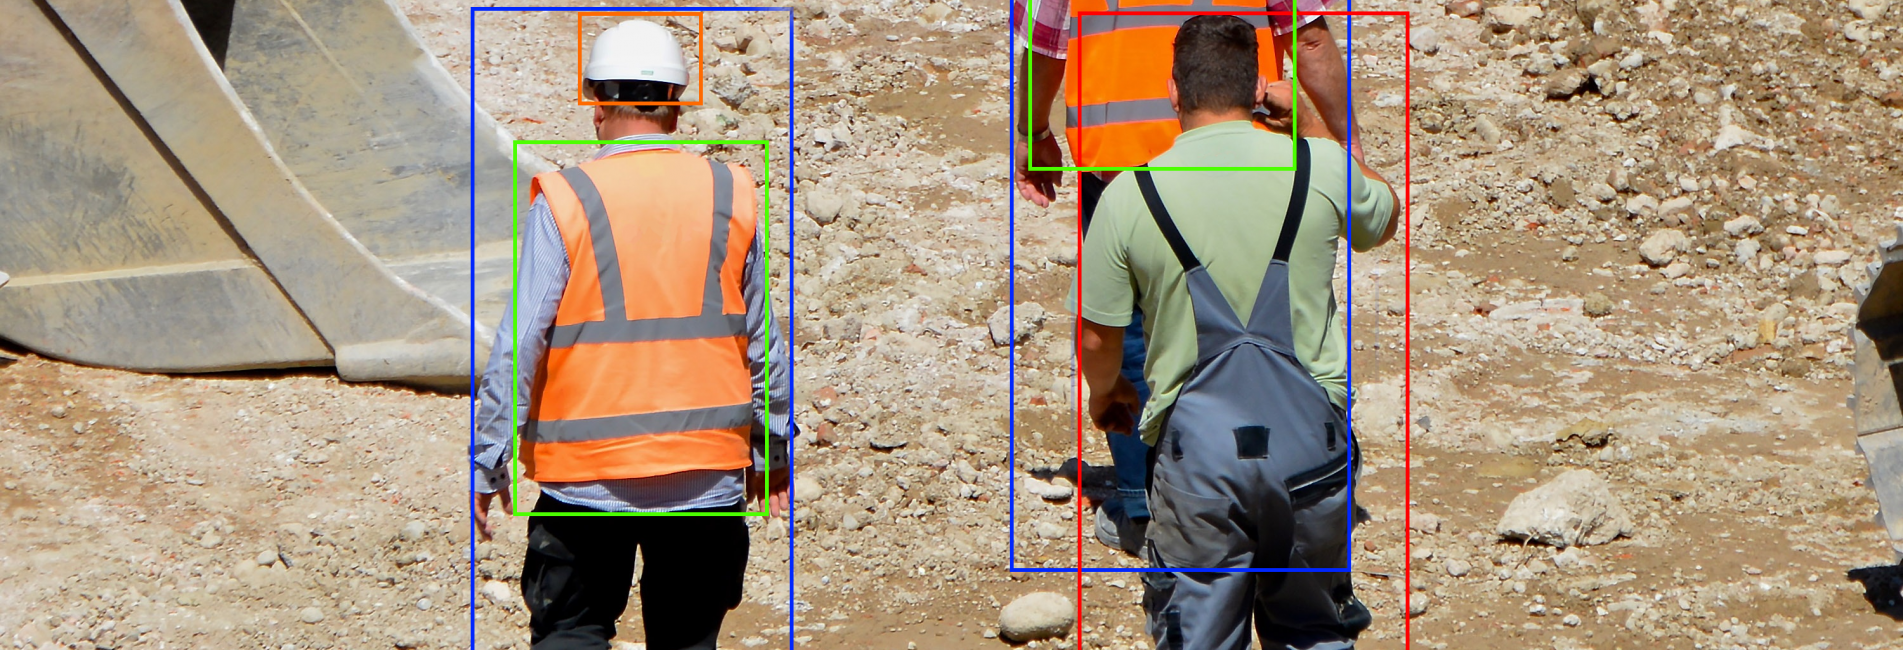 Adhering to company policy by wearing PPE is made significantly easier by using CCTV with PPE analytics. Find out more about the technology.